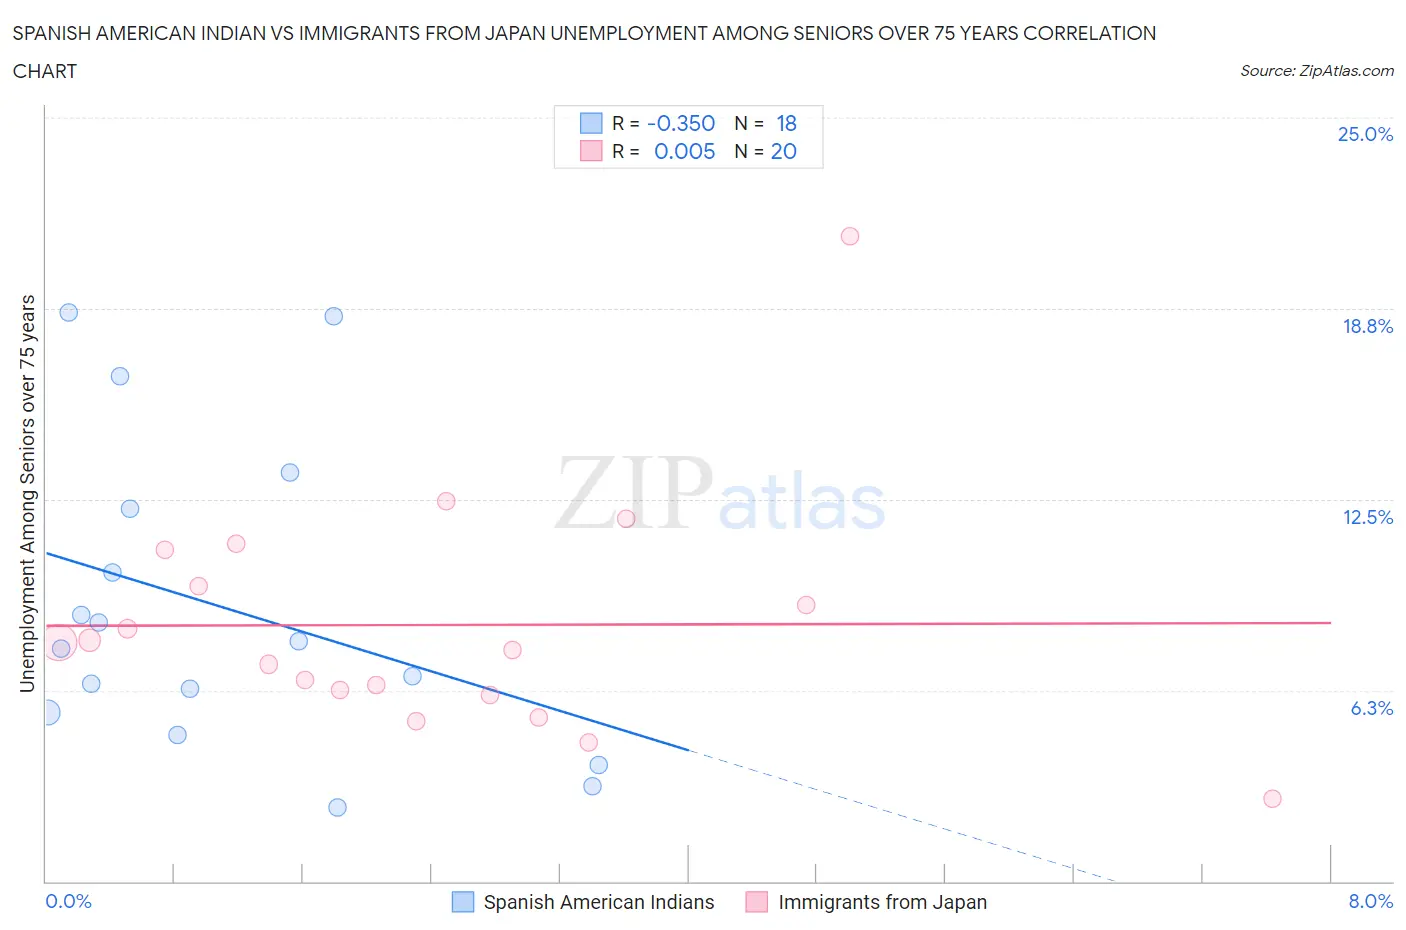 Spanish American Indian vs Immigrants from Japan Unemployment Among Seniors over 75 years